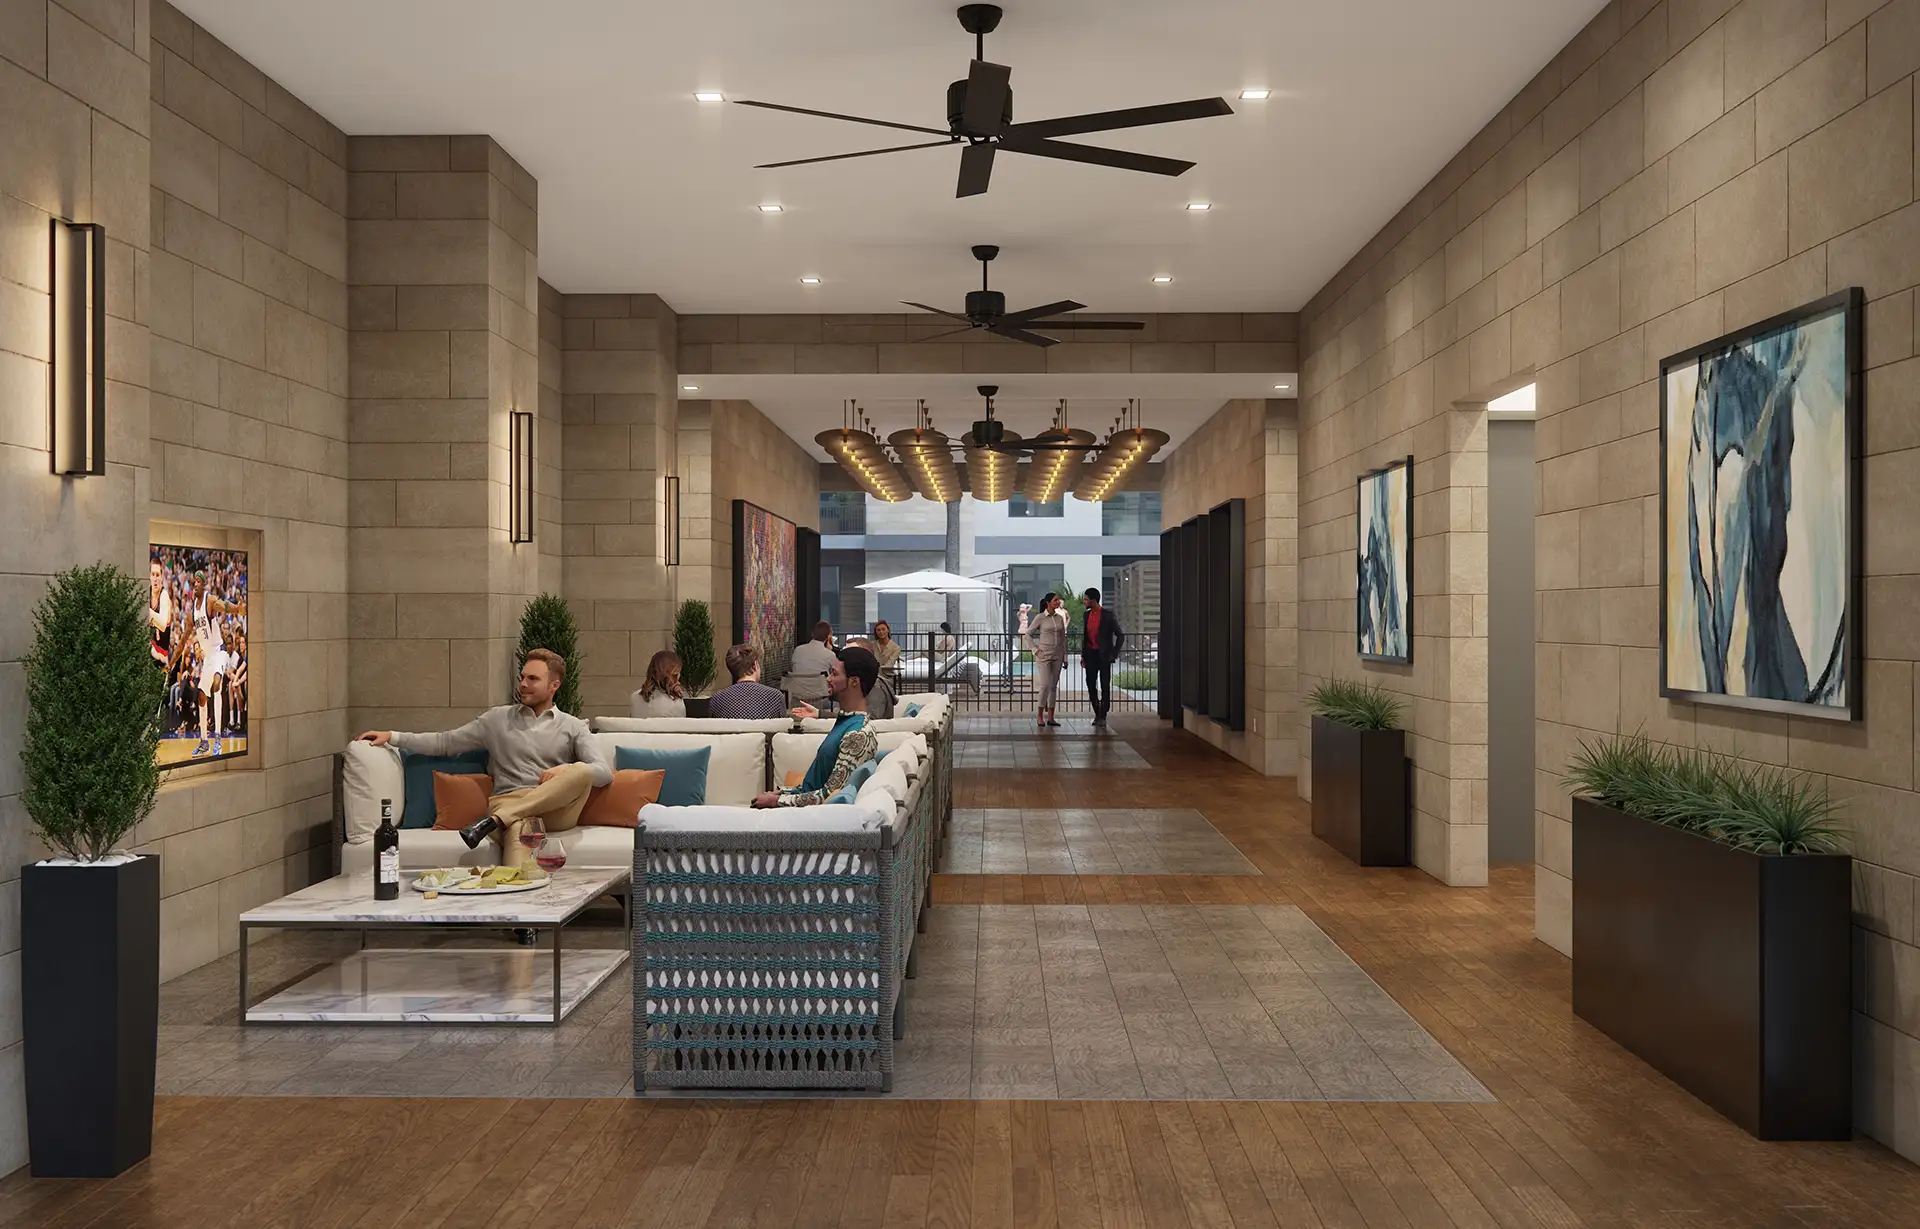 large hallway with amenities leading to outdoor amenity area